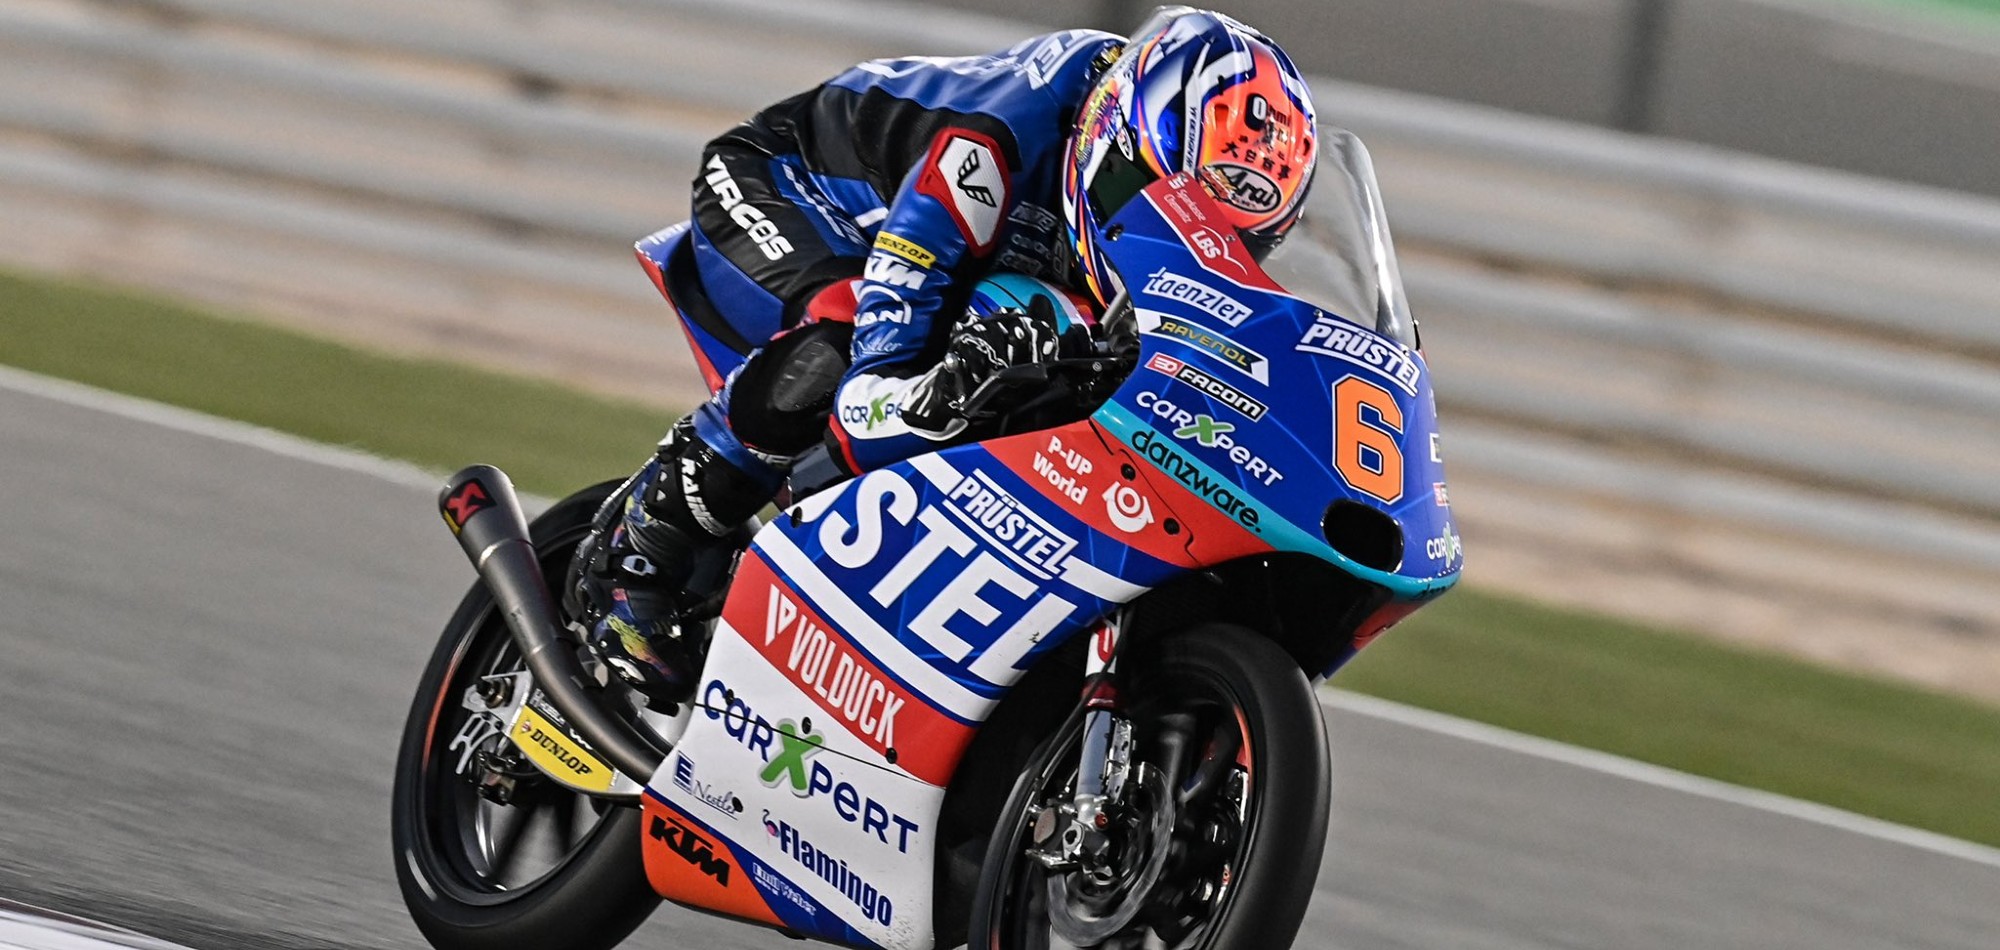 Moto2™: Vierge heads six riders split by just 0.089 on Day 2